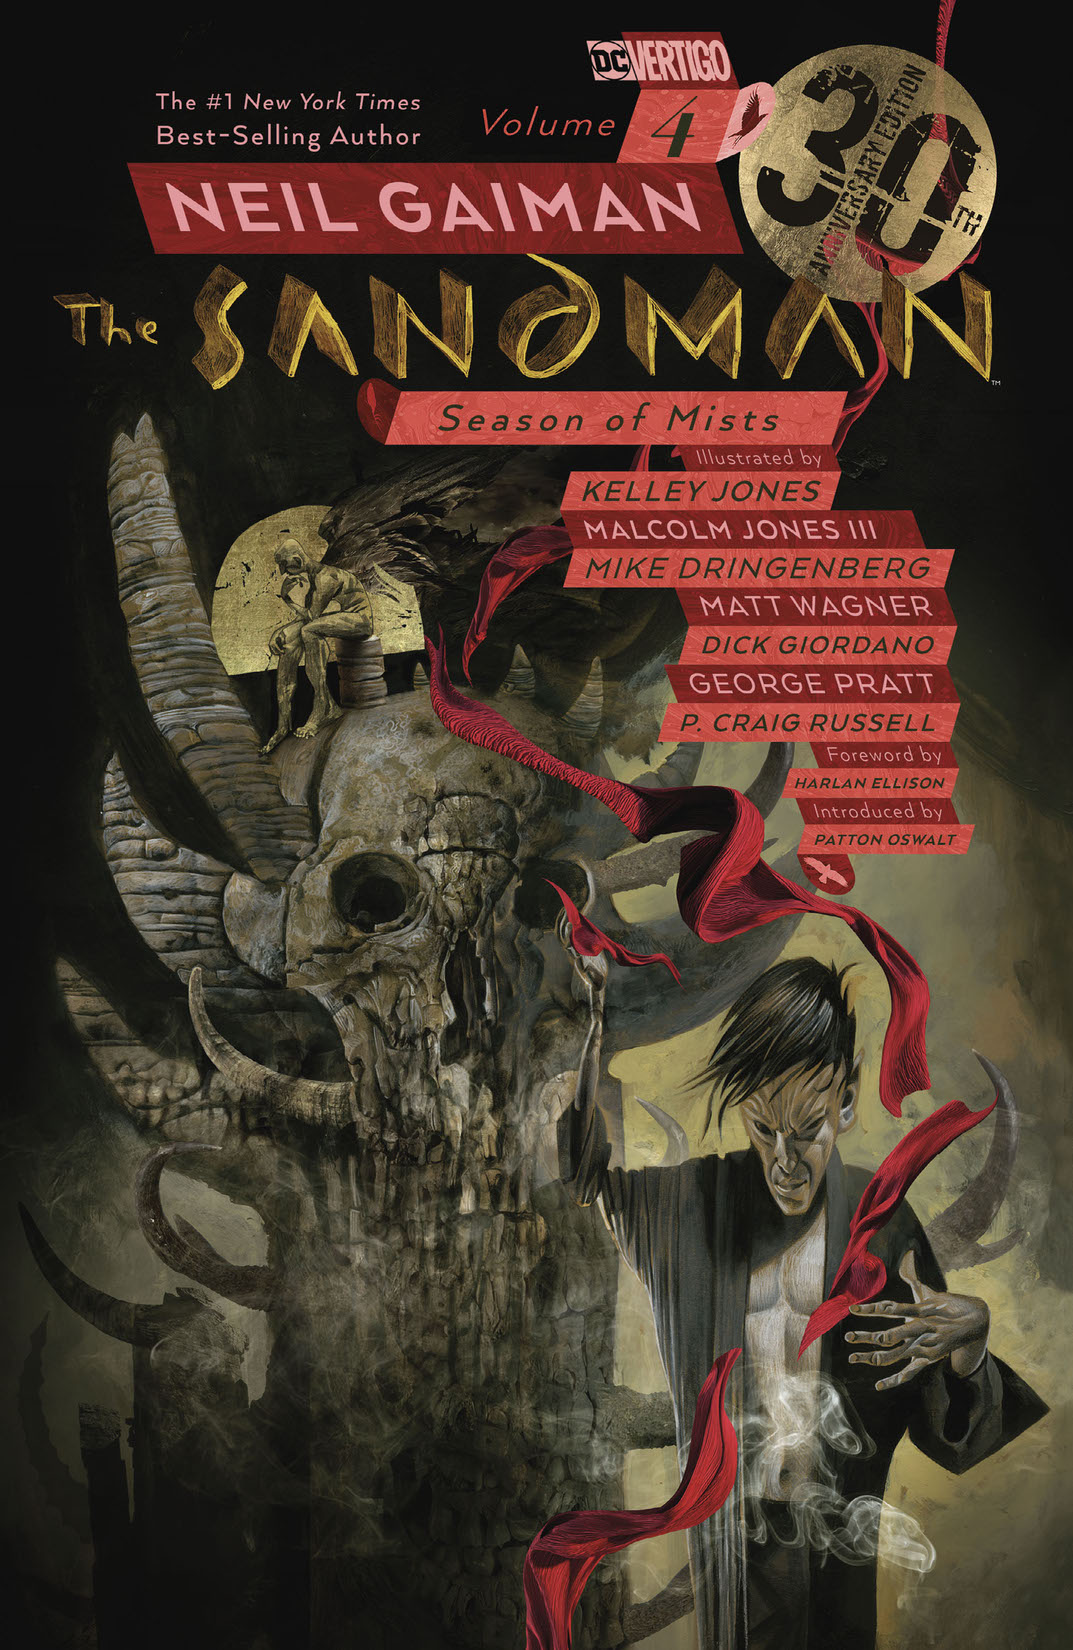 Sandman Vol. 4 30th Anniversary Edition preview images